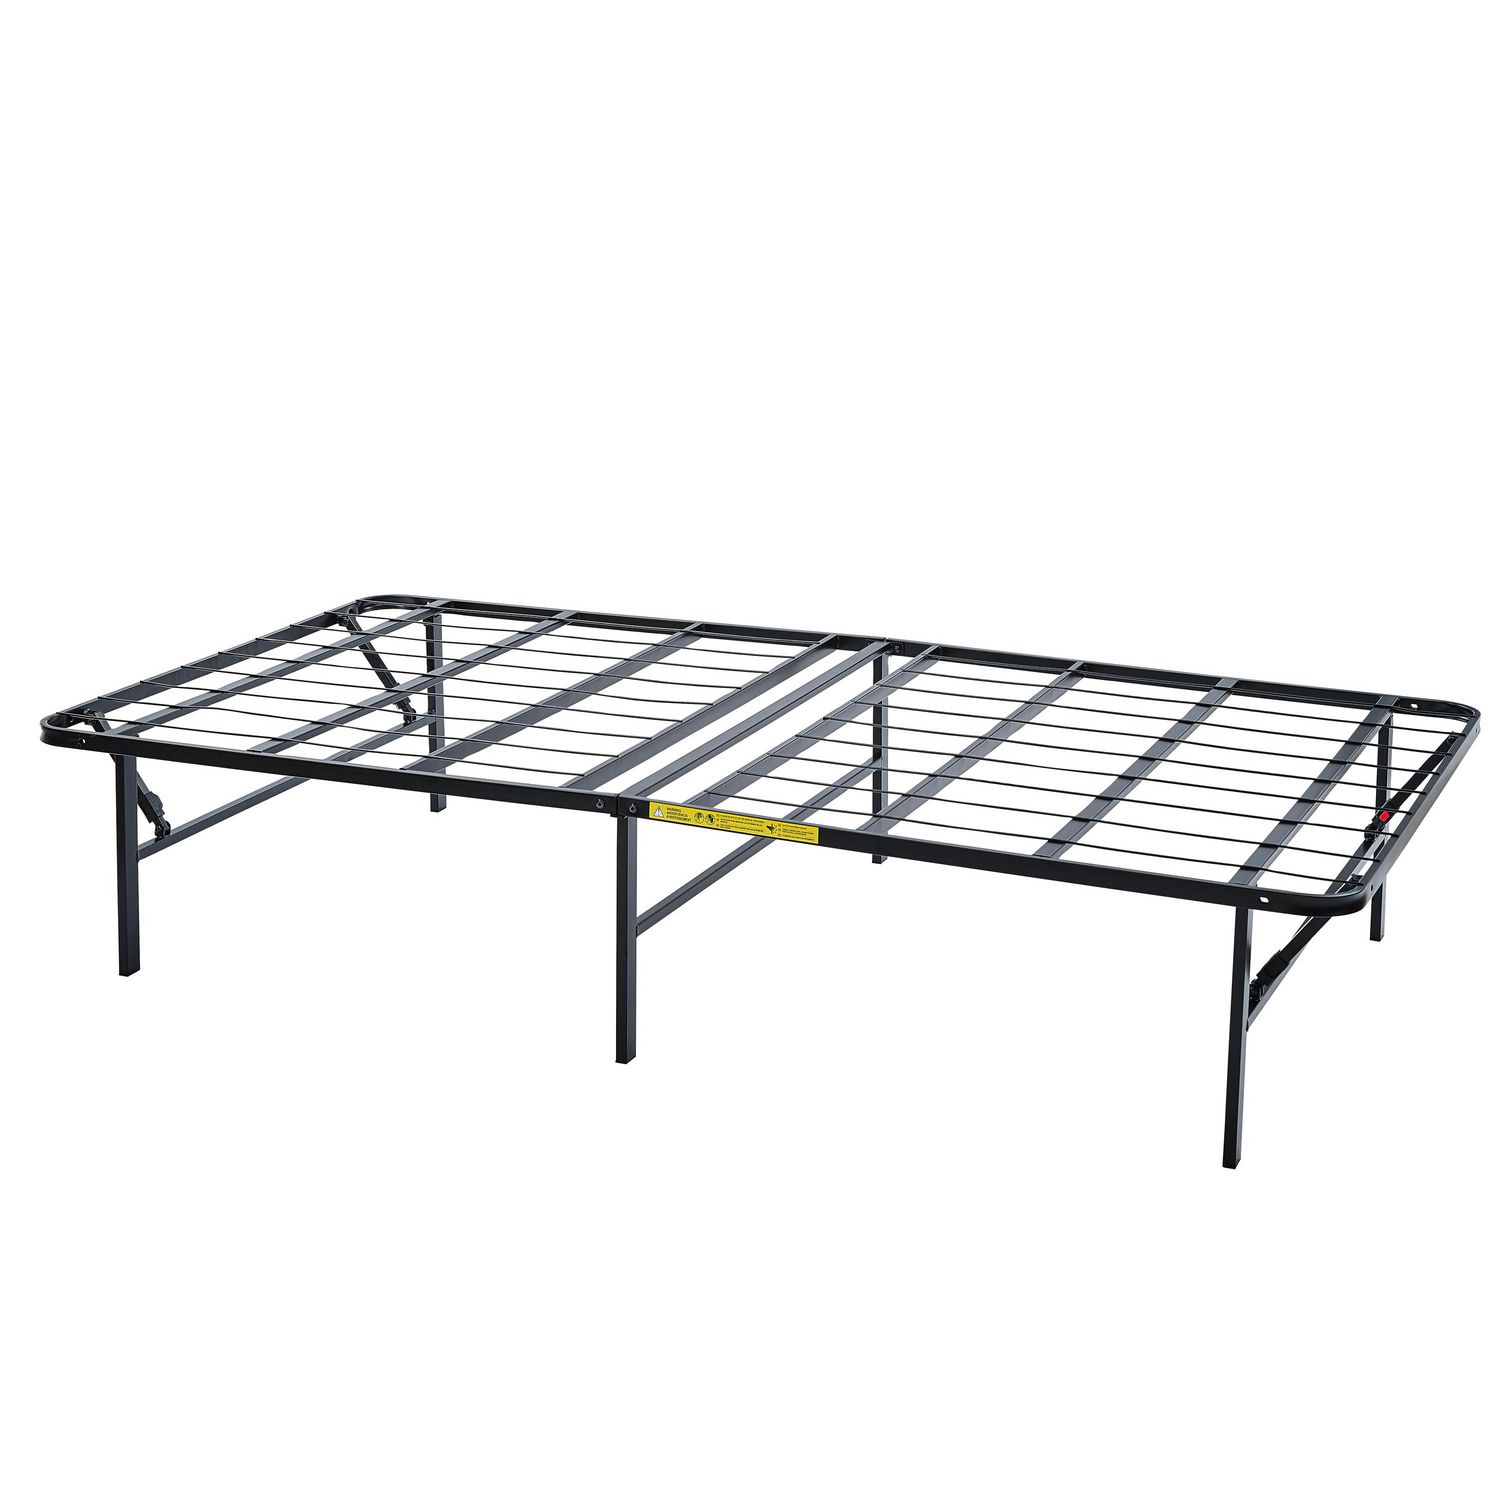 High Profile Foldable Steel Bed Frame, Folding Bed Frame With Wheels